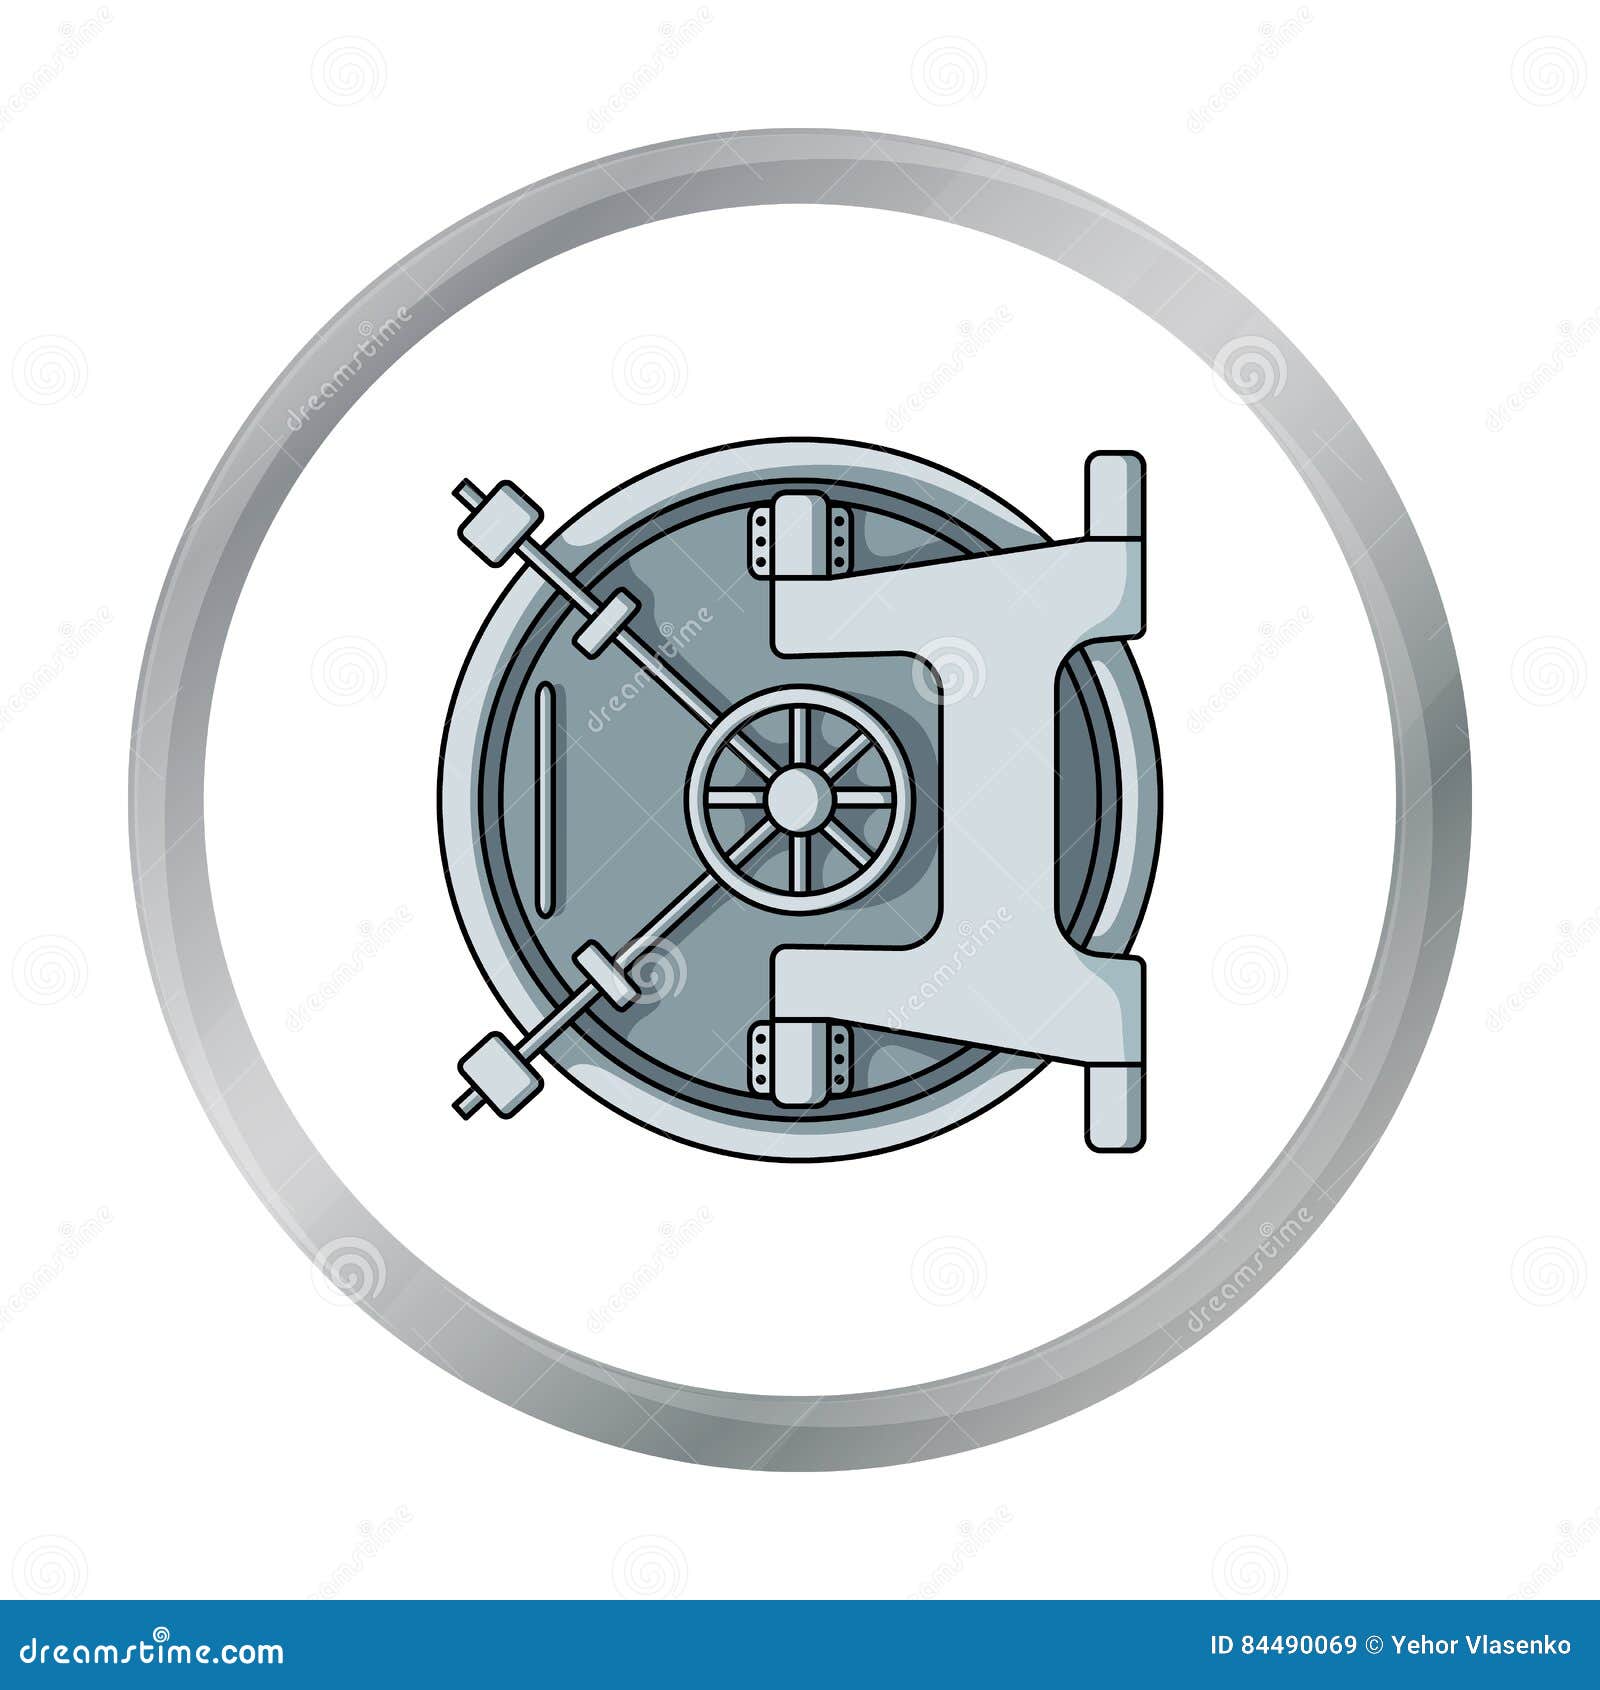 Bank Vault Icon In Cartoon Style Isolated On White Background